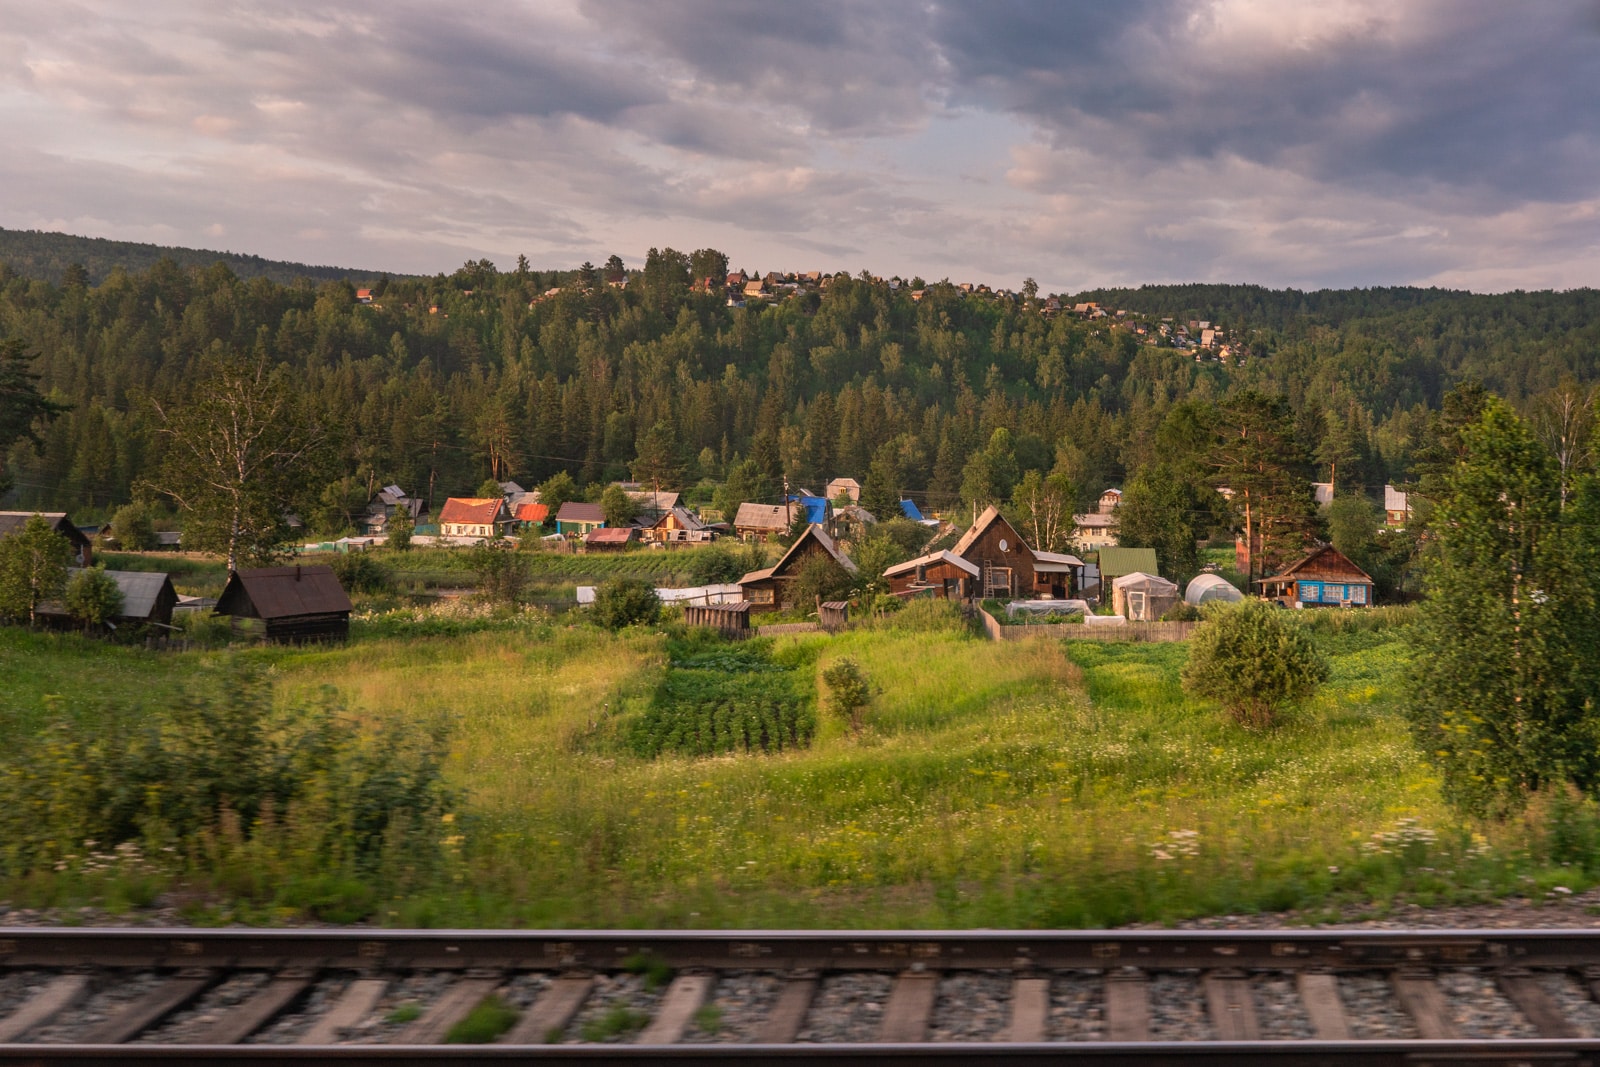 Siberian landscapes from the window of a Trans-Siberian train in Russia